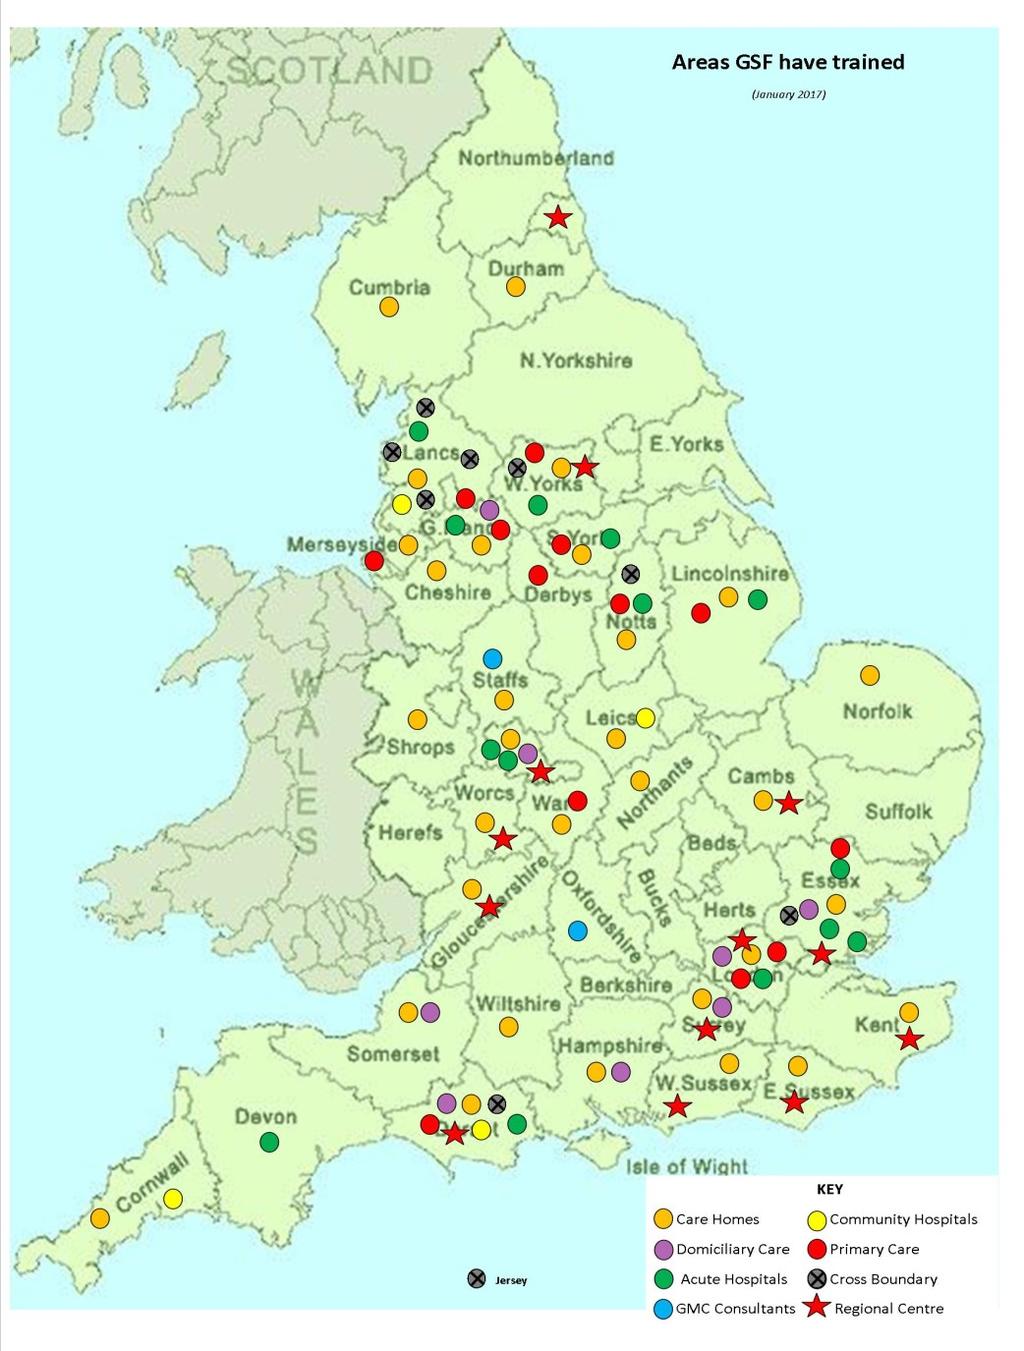 GSF projects across the UK North Lancashire/Morecambe Bay 15 practices, 1 whole Hospital 30 wards & Care Homes Locala, Kirklees 31 Care Homes Cumbria 13 community hospitals Central Wrightington Wigan